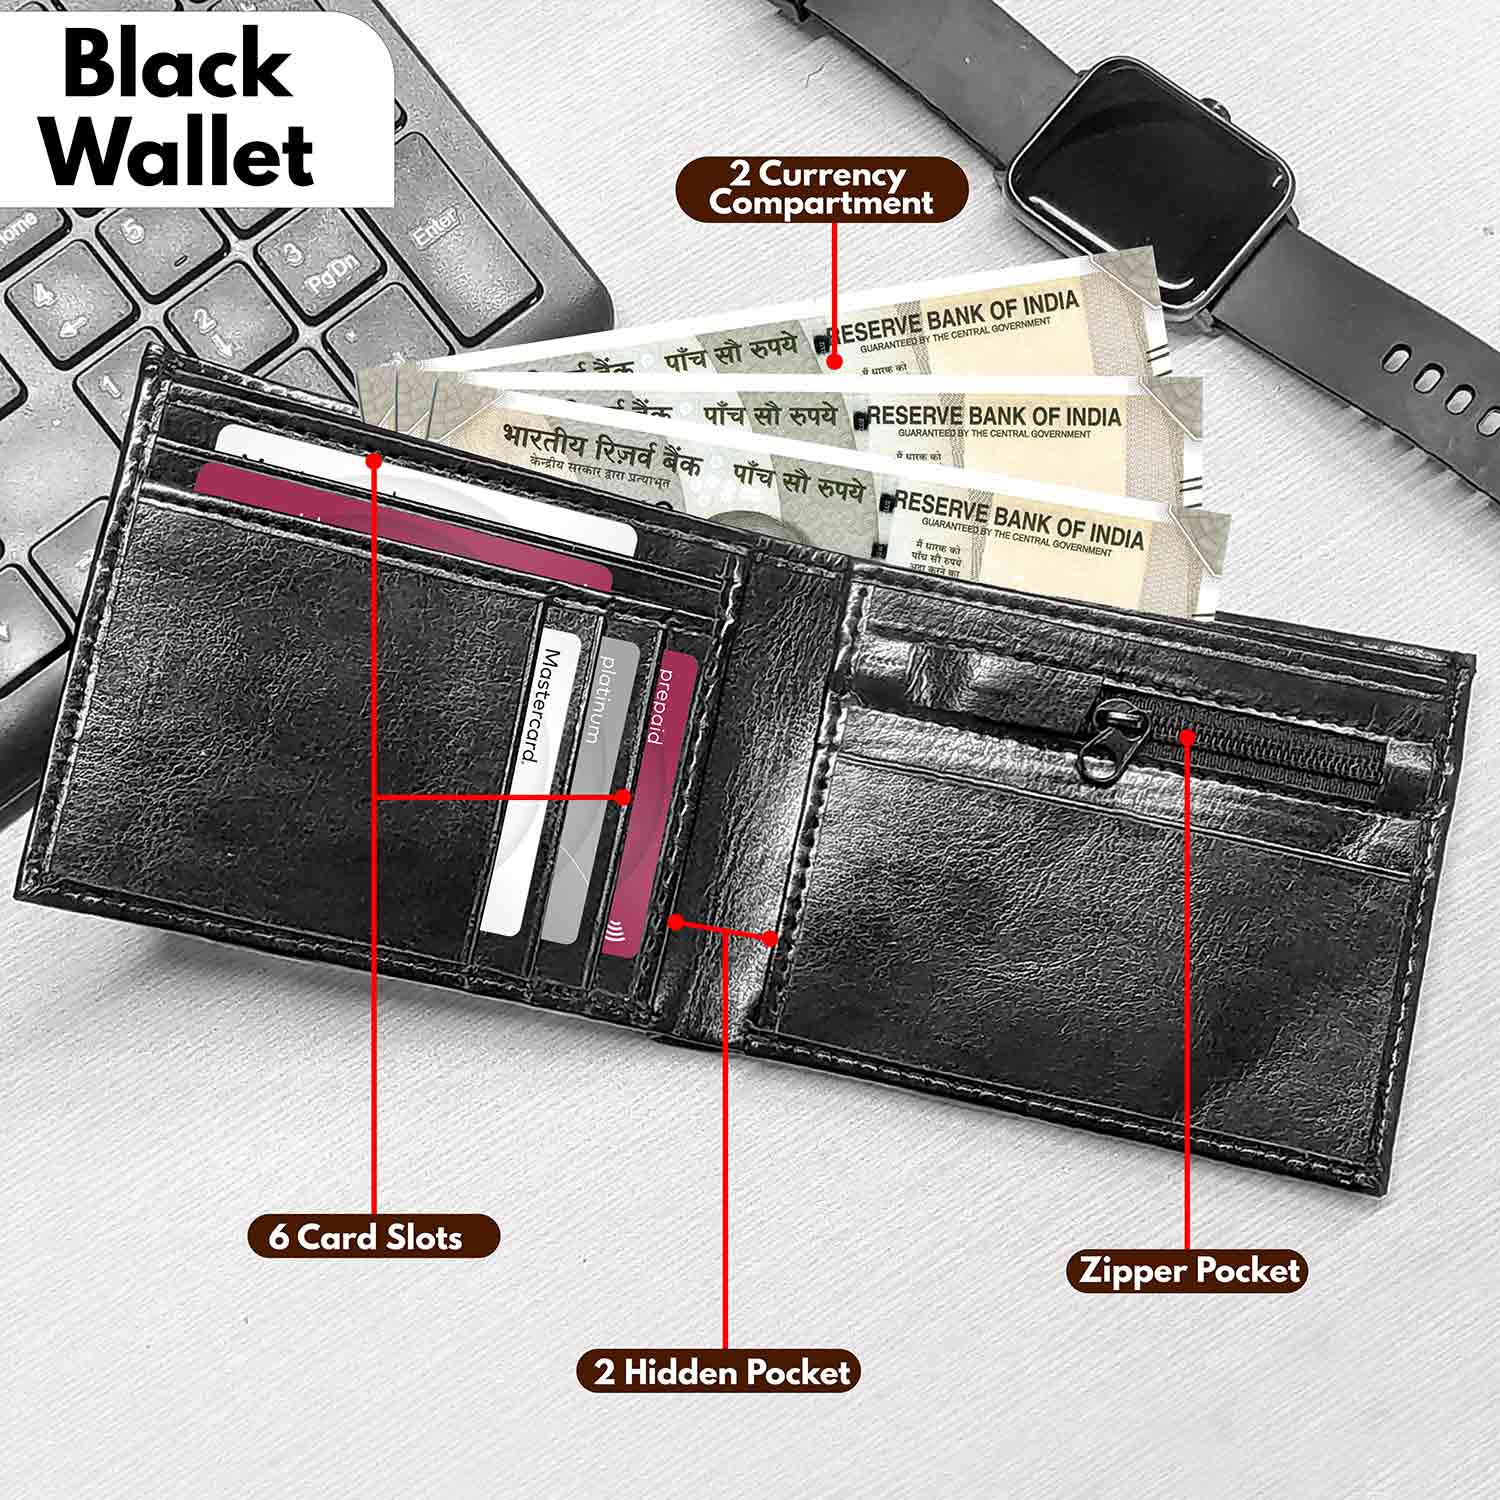 Personalized Men's Wallet Combo with Pen, Keychain & Cardholder